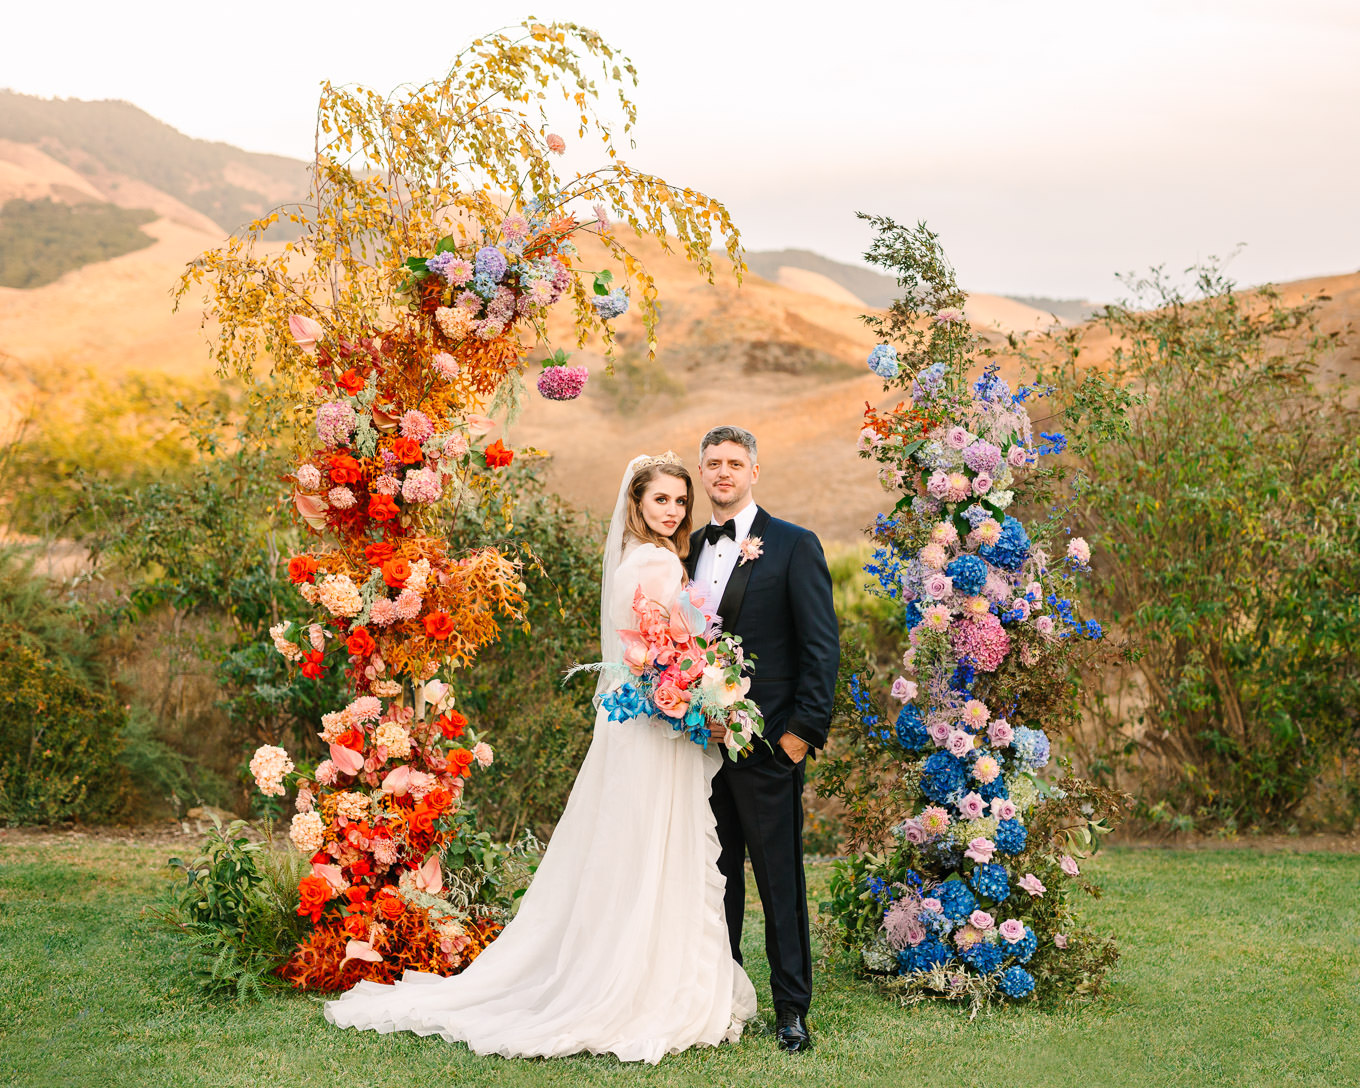 Allison Harvard & Jeremy Burke portraits at floral wedding ceremony installation | Colorful and quirky wedding at Higuera Ranch in San Luis Obispo | #sanluisobispowedding #californiawedding #higueraranch #madonnainn   

Source: Mary Costa Photography | Los Angeles